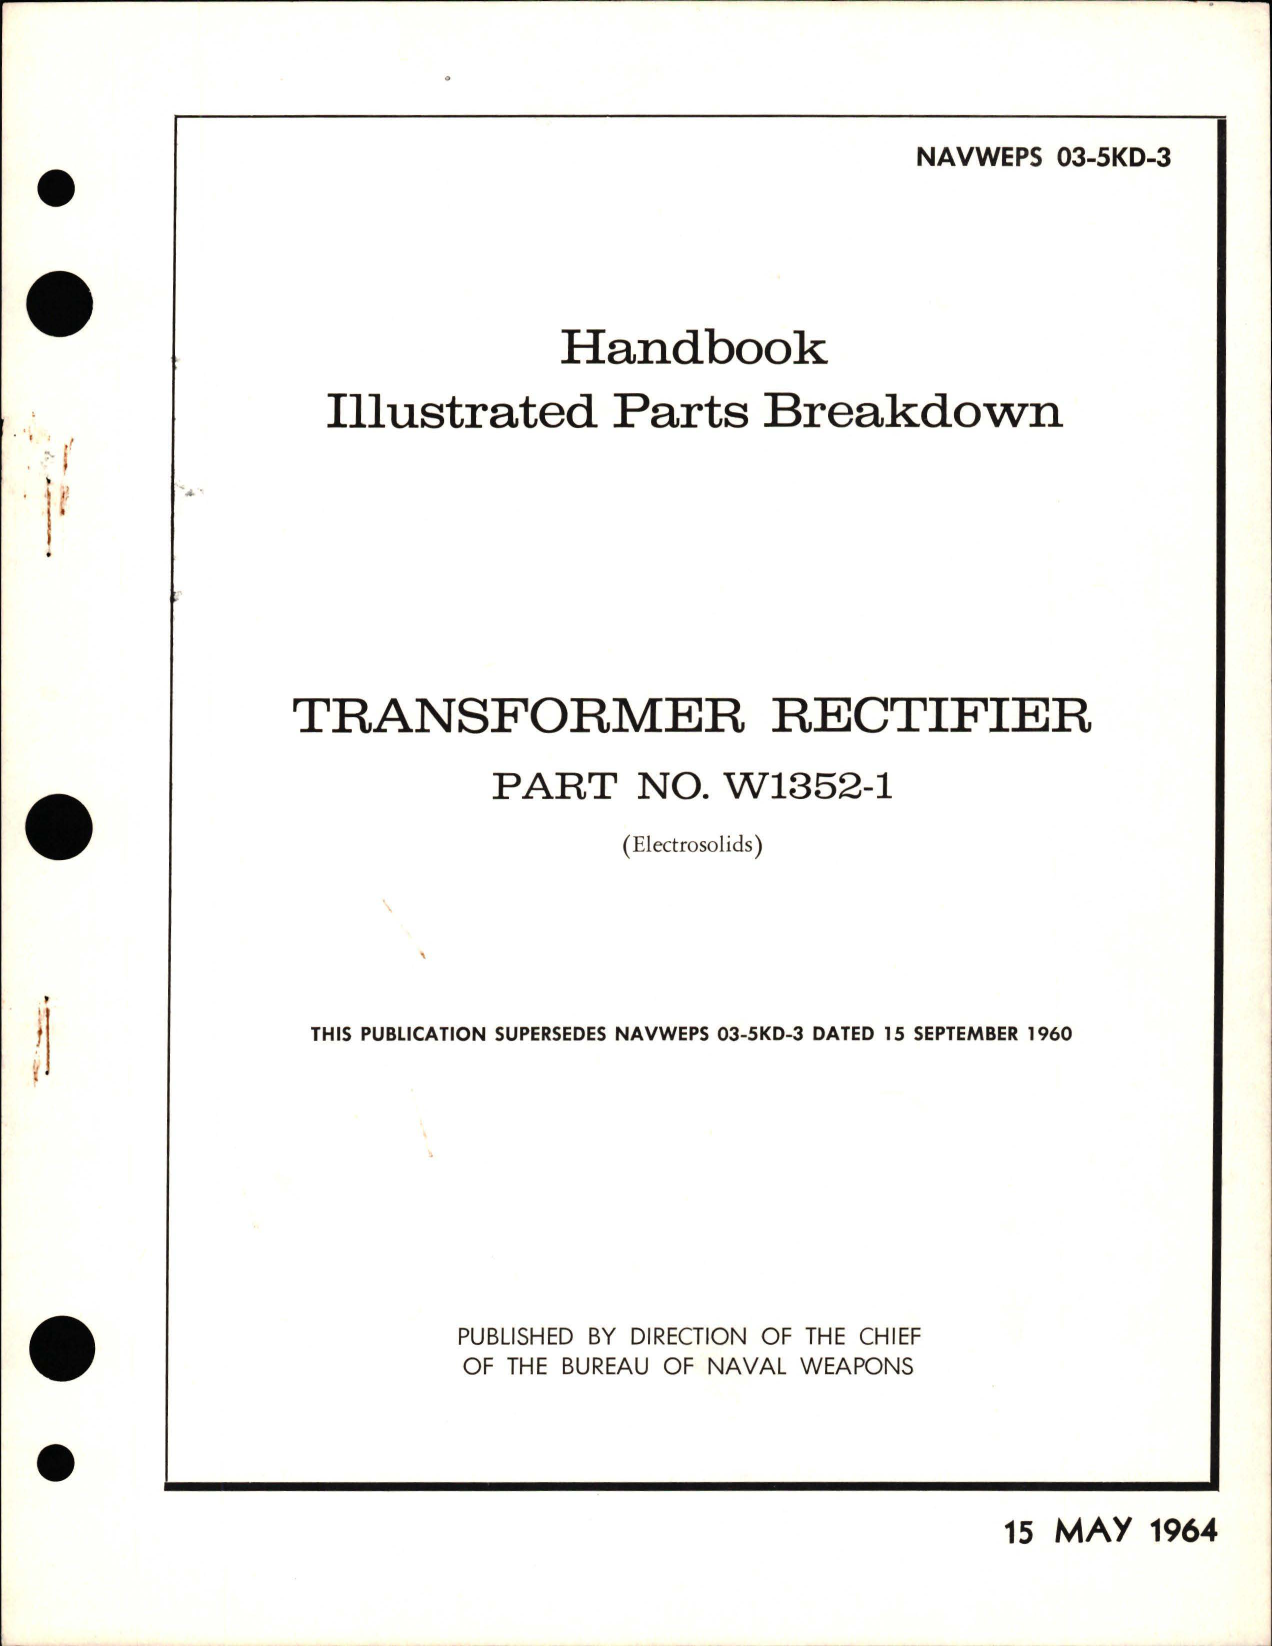 Sample page 1 from AirCorps Library document: Illustrated Parts Breakdown for Transformer Rectifier - Part W1352-1